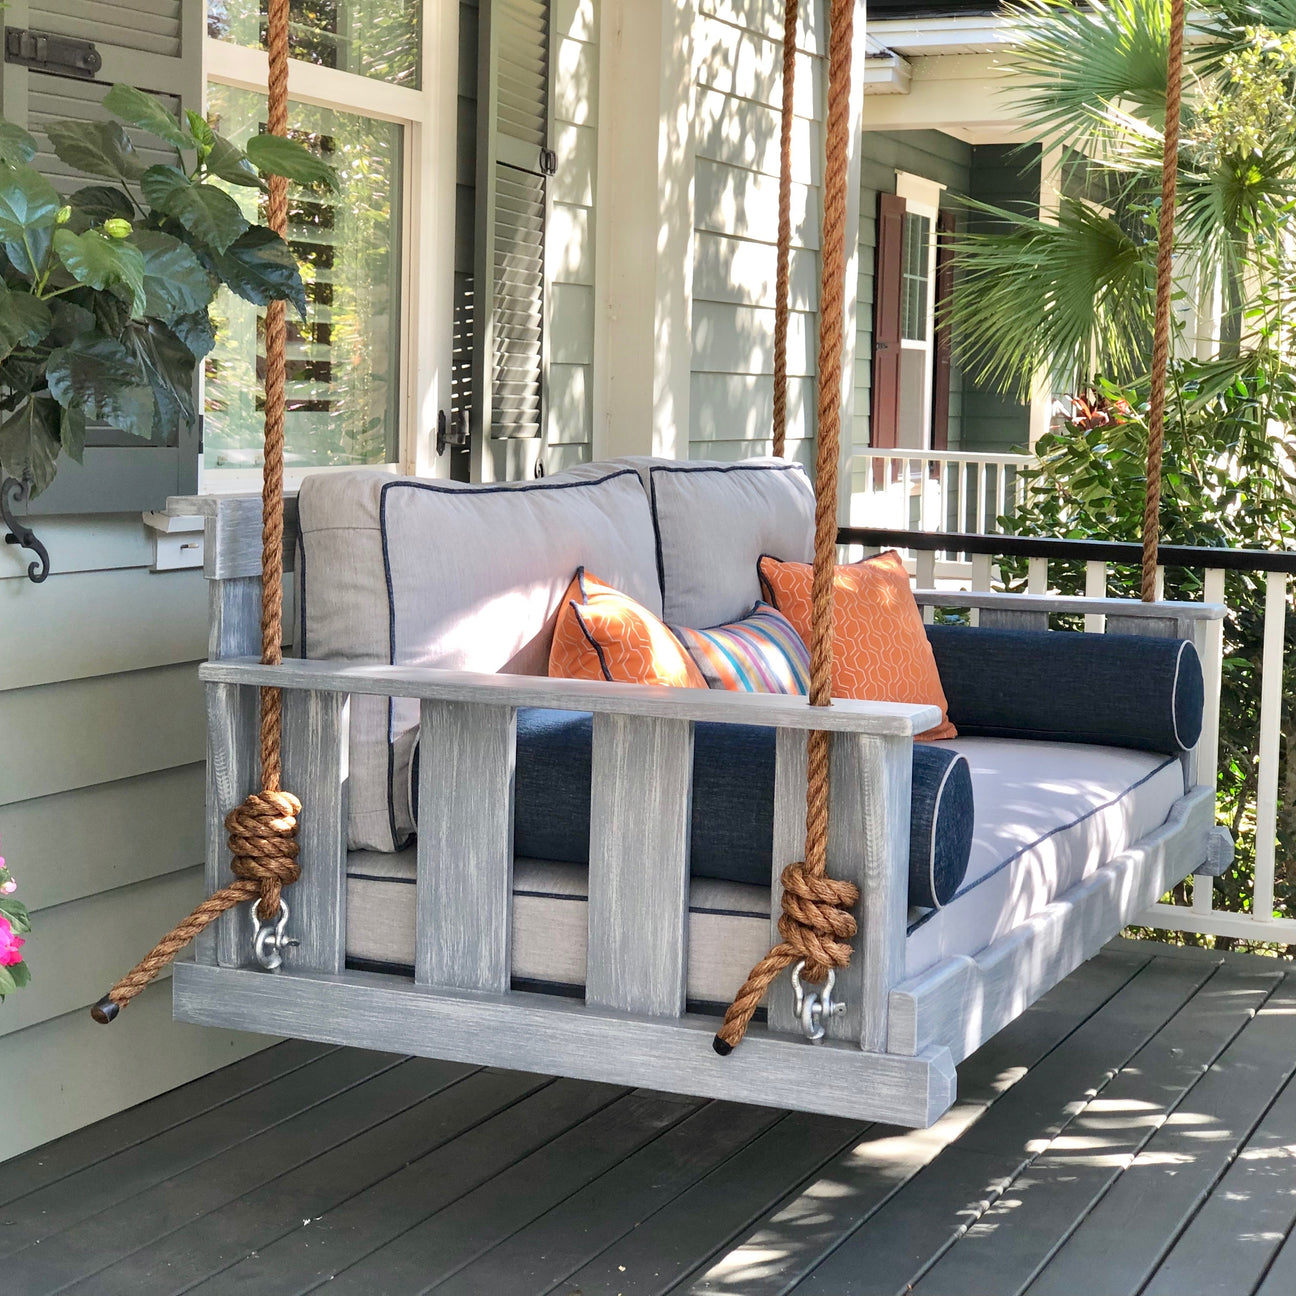 The Cabana Lido Bed Swing – The Bed Swing